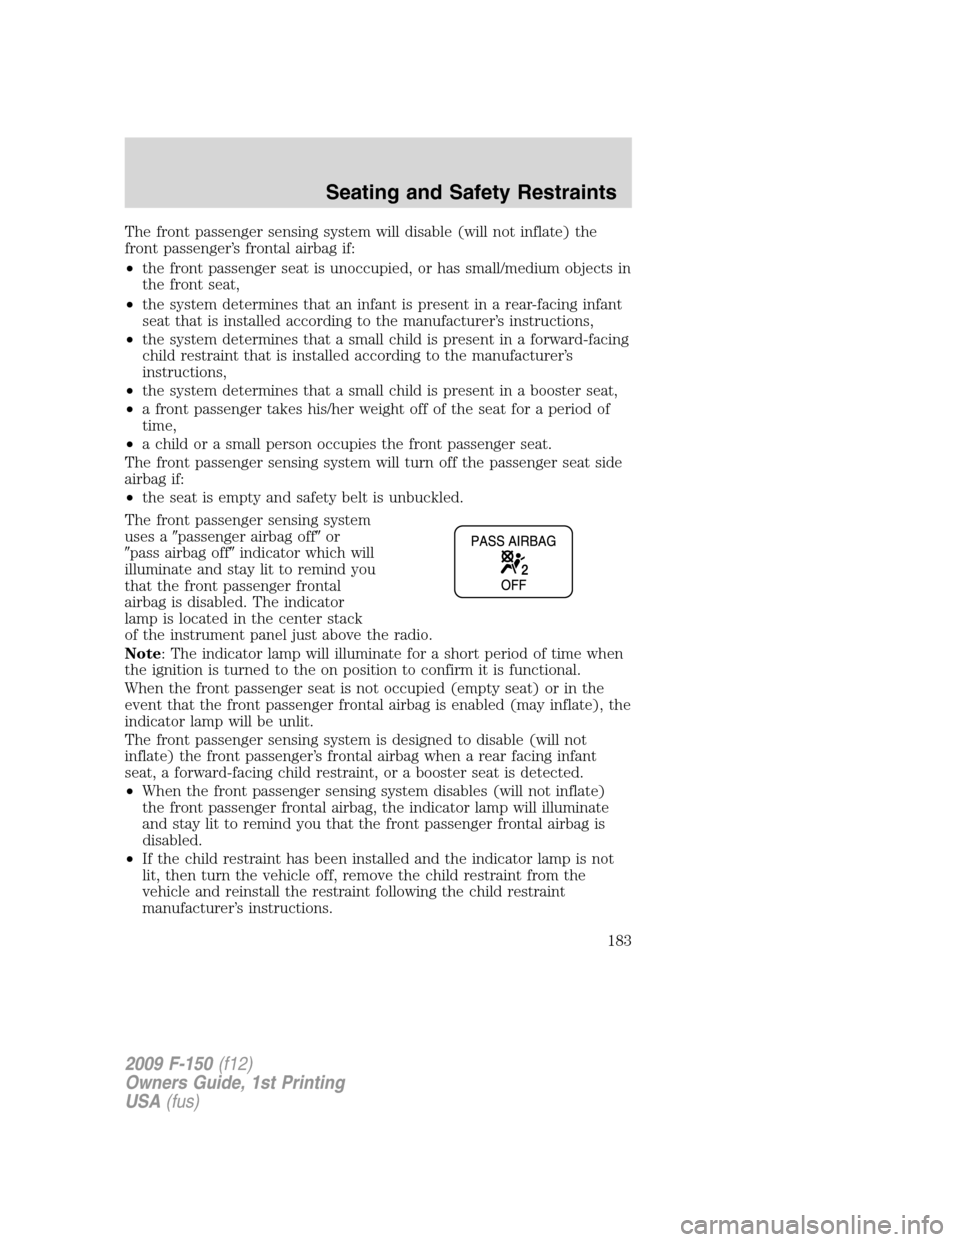 FORD F150 2009 12.G Owners Manual The front passenger sensing system will disable (will not inflate) the
front passenger’s frontal airbag if:
•the front passenger seat is unoccupied, or has small/medium objects in
the front seat,
